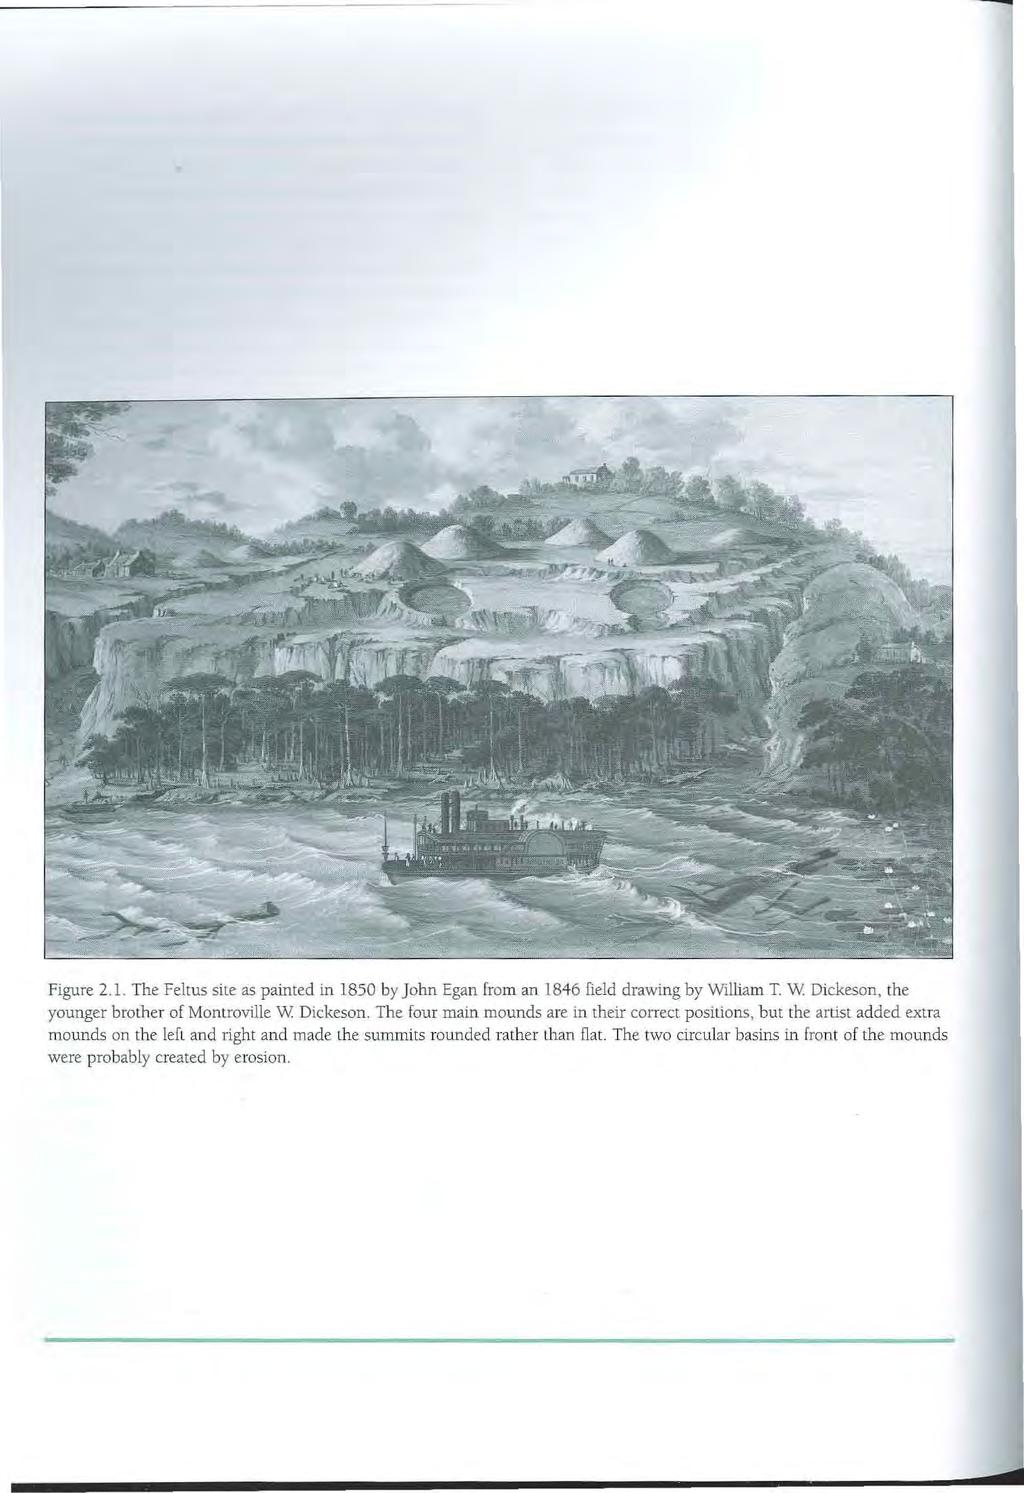 Figure 2.1. The Feltus sile as painted in 1850 by John Egan from an 1846 field drawing by William T. W Dickeson, the younger brother of Monlroville W Dickeson.